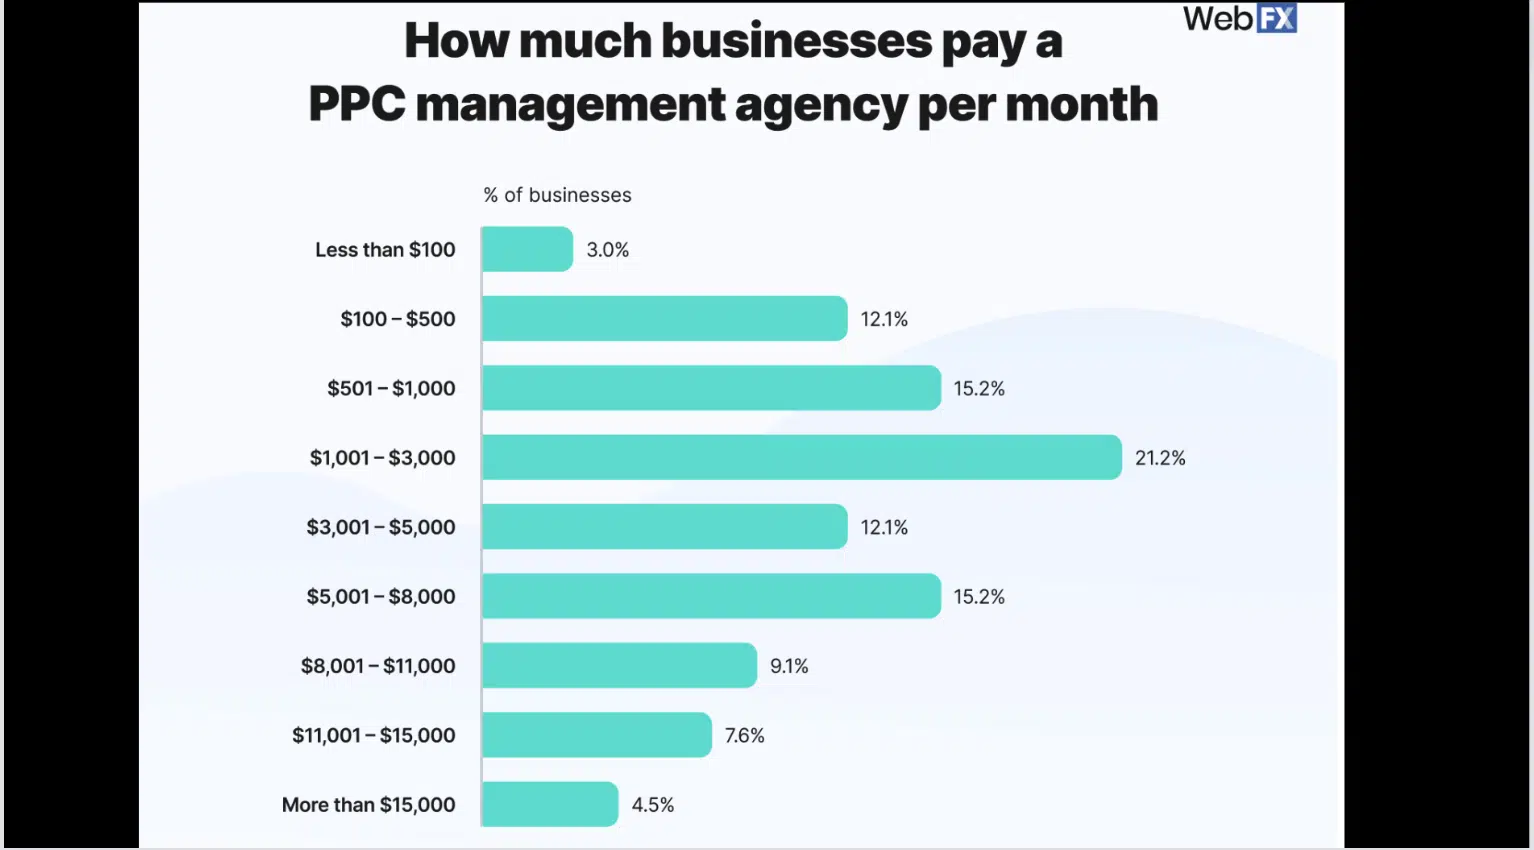 ppc management cost according to webfx.com